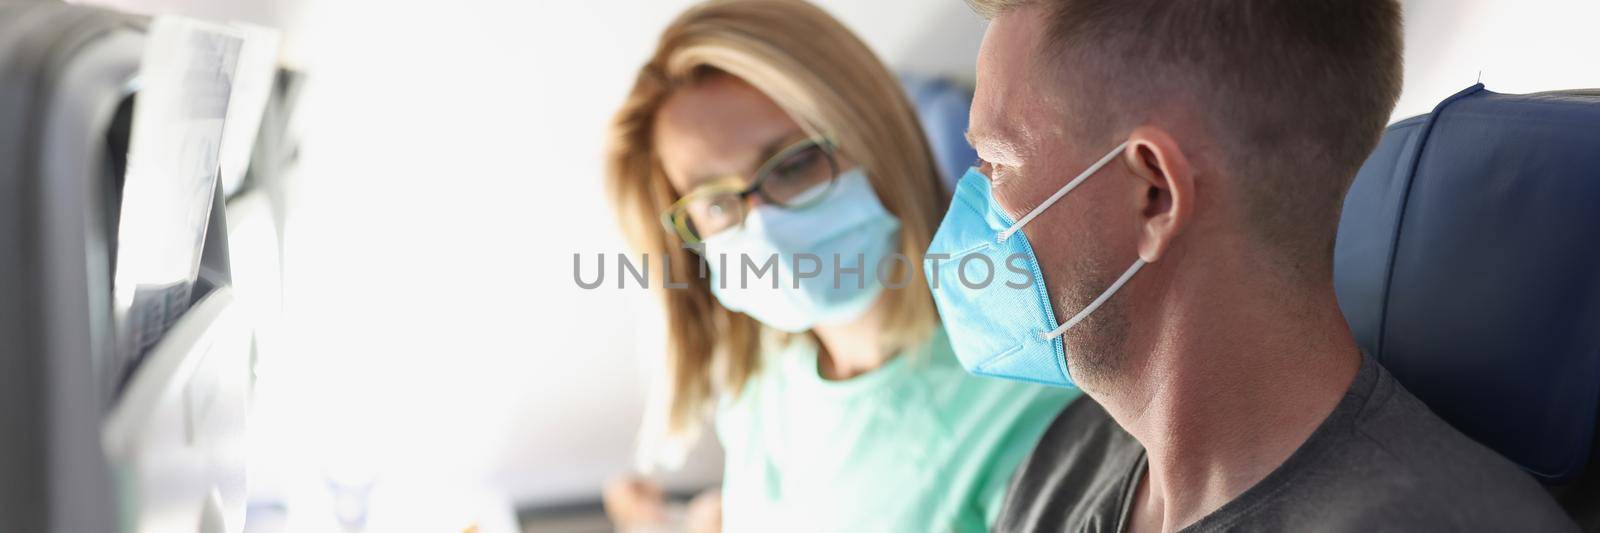 Portrait of family couple choosing meal on board. Hungry man discuss with wife food options, fly high in sky, wear face masks on flight. Airplane, food serving, menu, coronavirus, pandemic concept